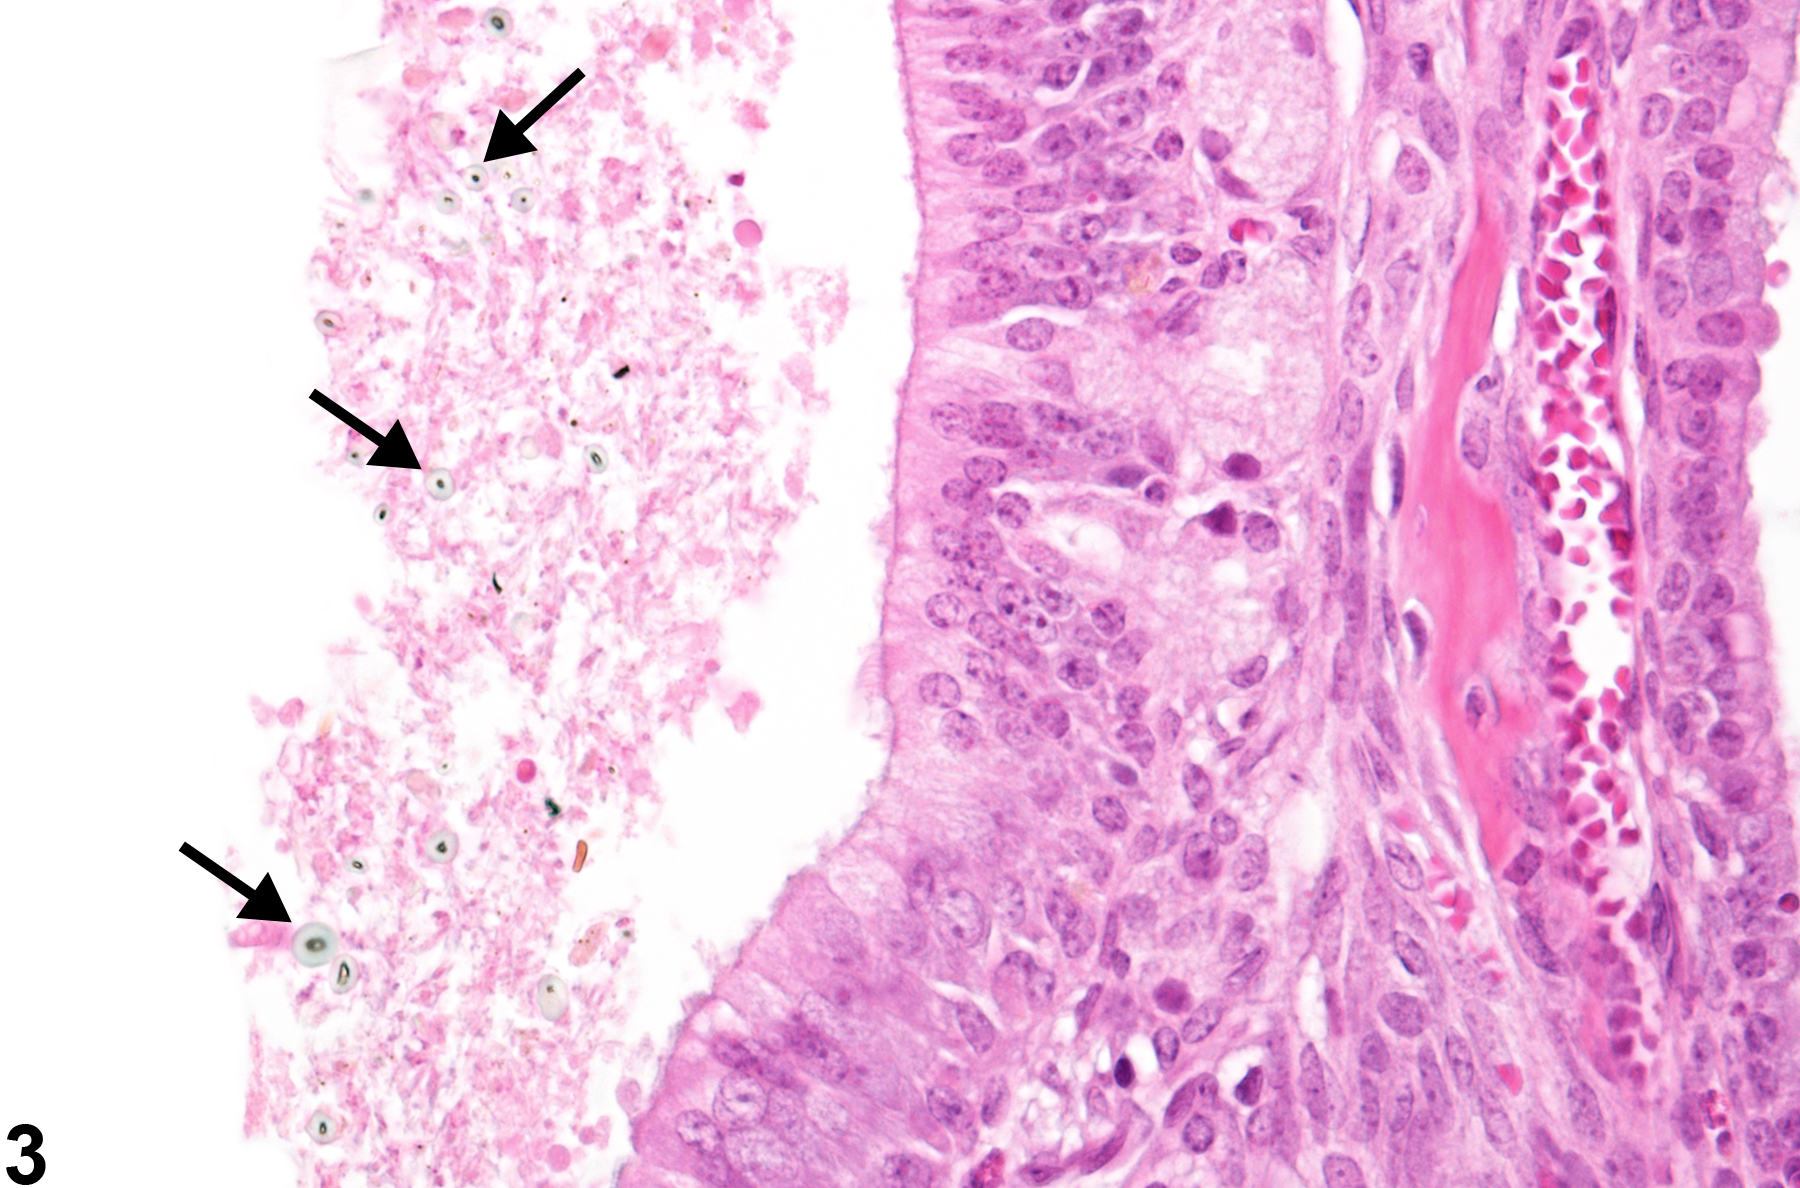 Image of foreign body in the nose from a female B6C3F1/N mouse in a subchronic study